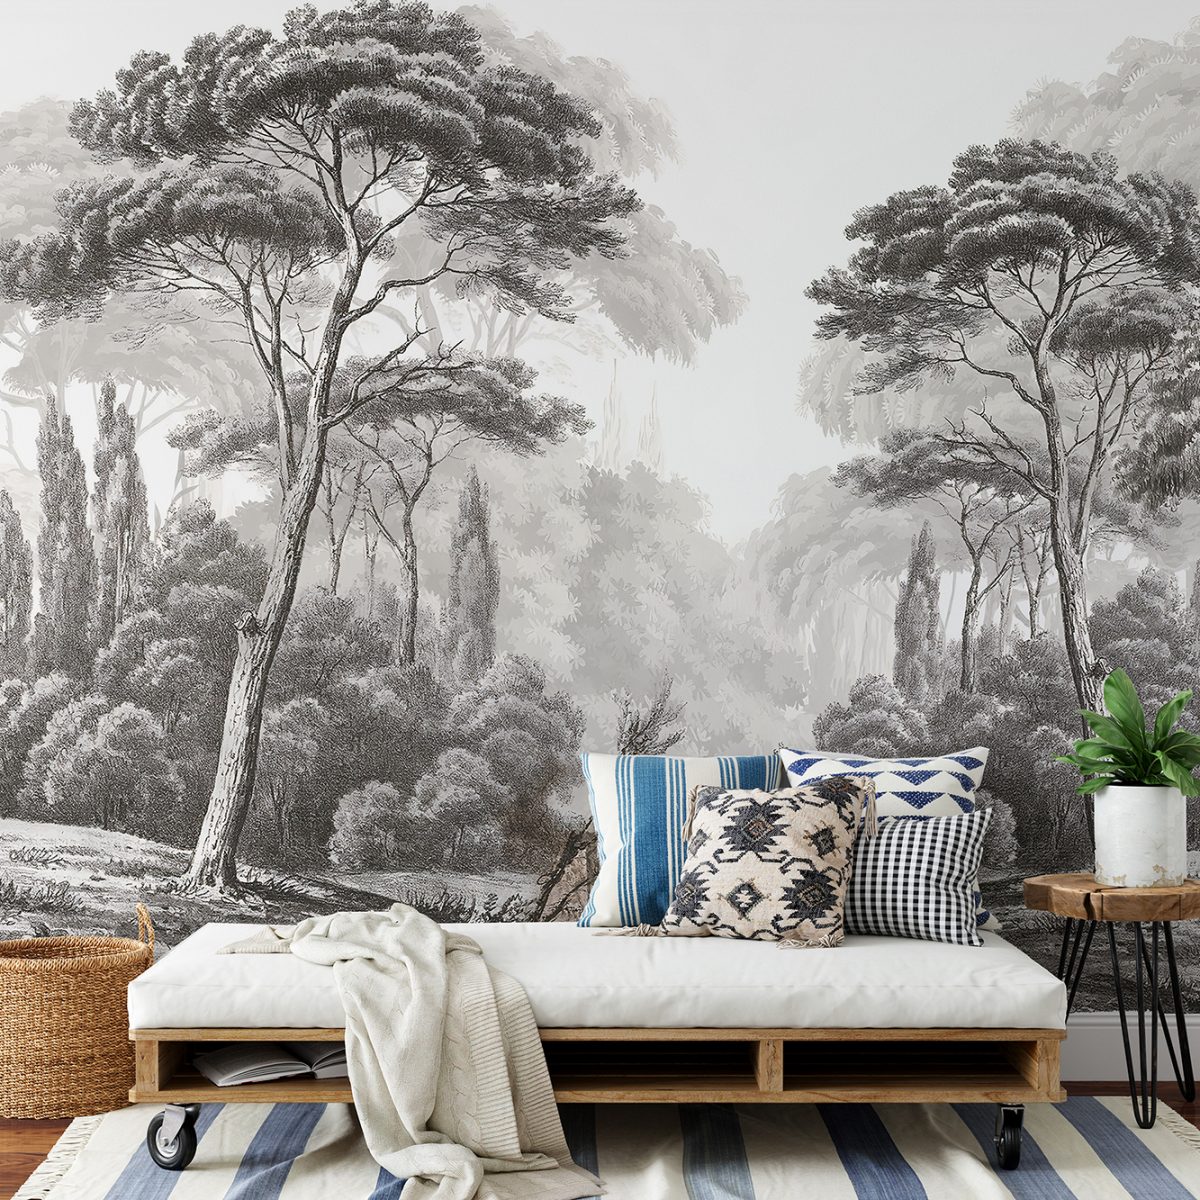 The Foggy Forest Artistic Wallpaper Mural